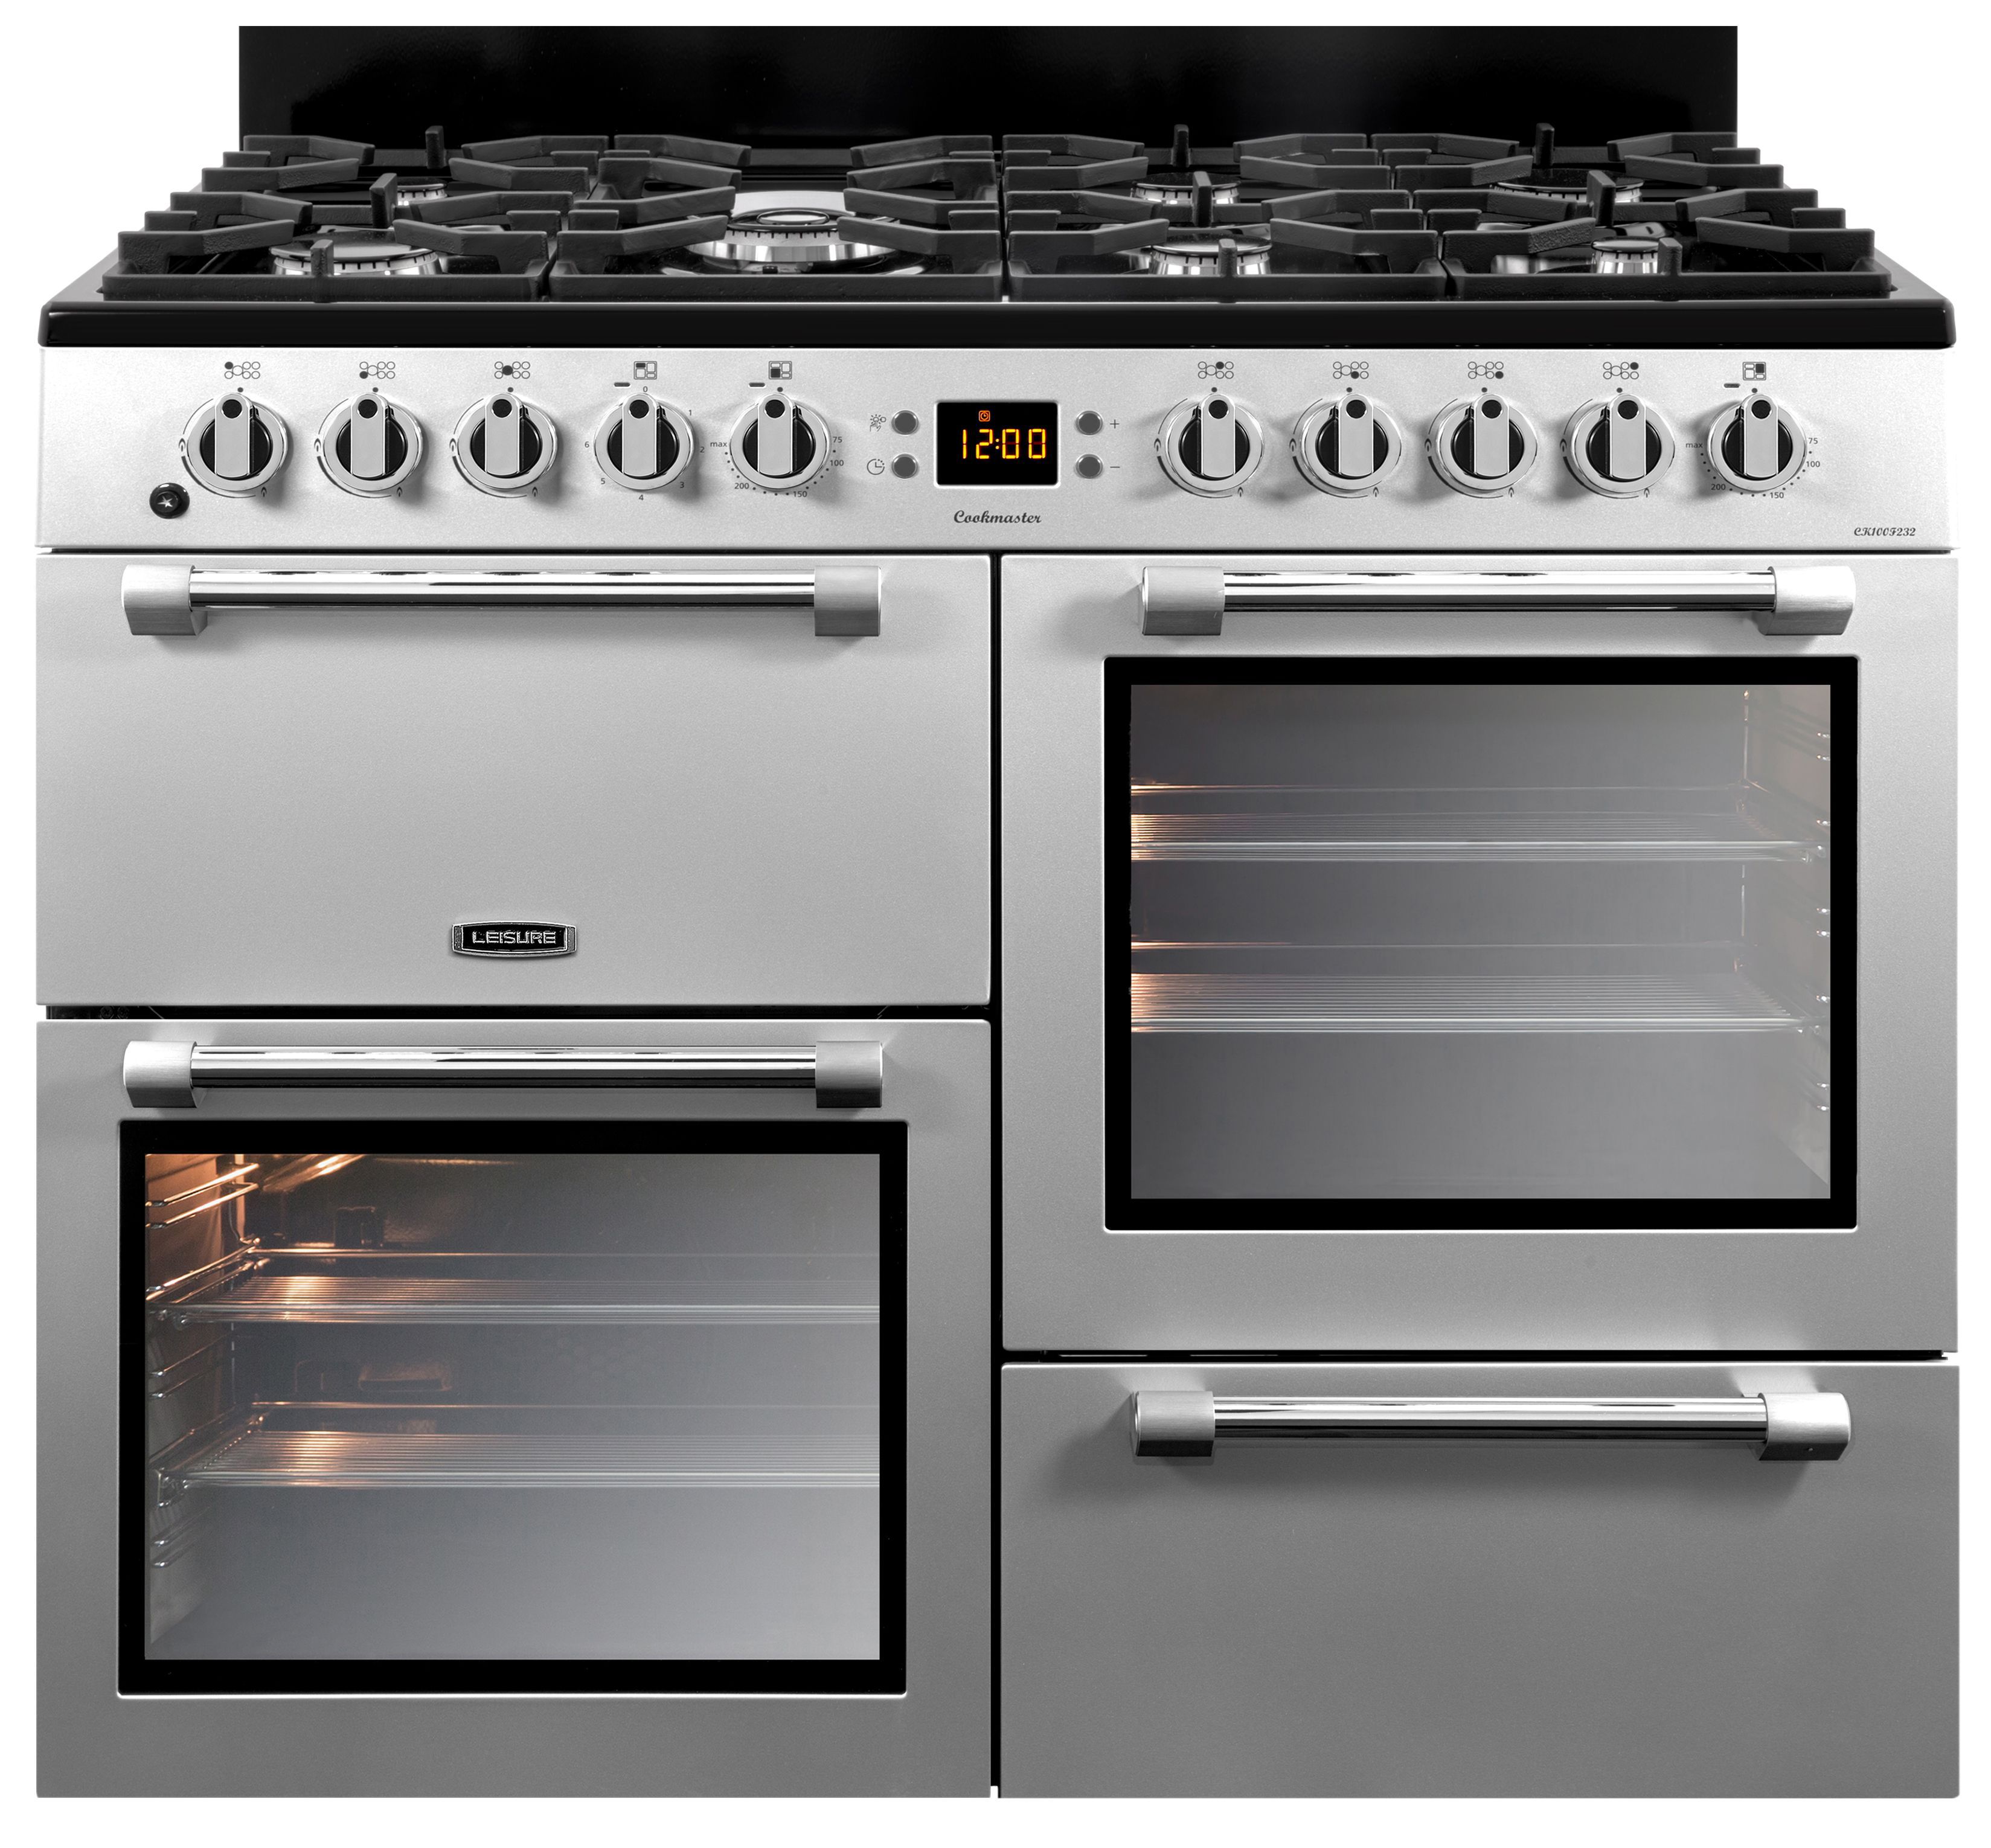 Leisure Cookmaster CK100F232S Freestanding Dual fuel Range cooker with